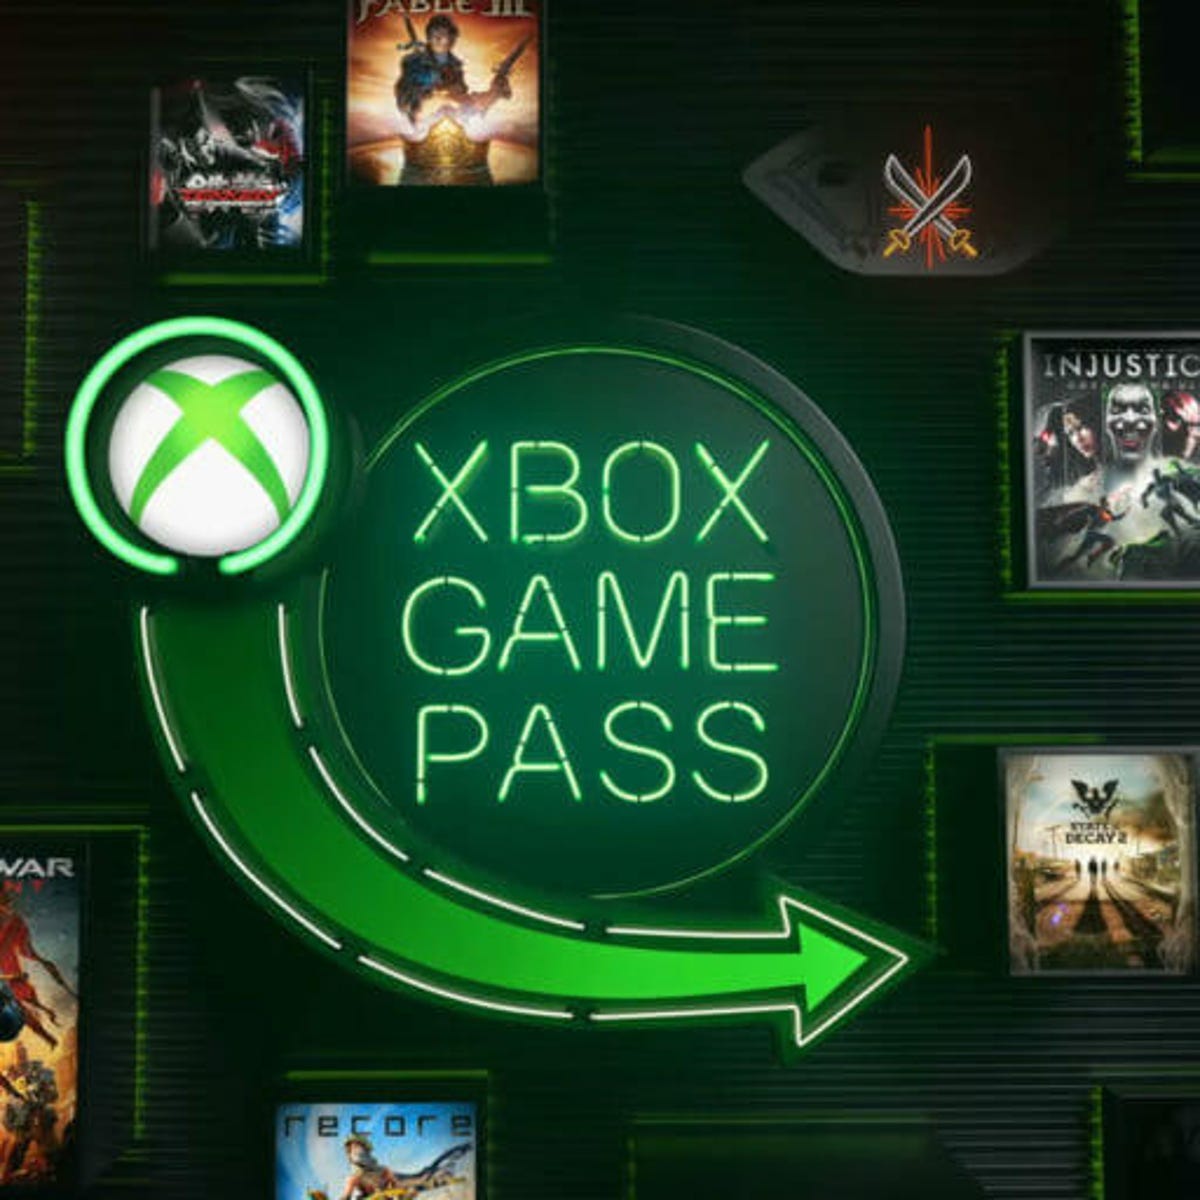 Xbox Game Pass Core, Console, PC and Ultimate. Which Tier Is Best